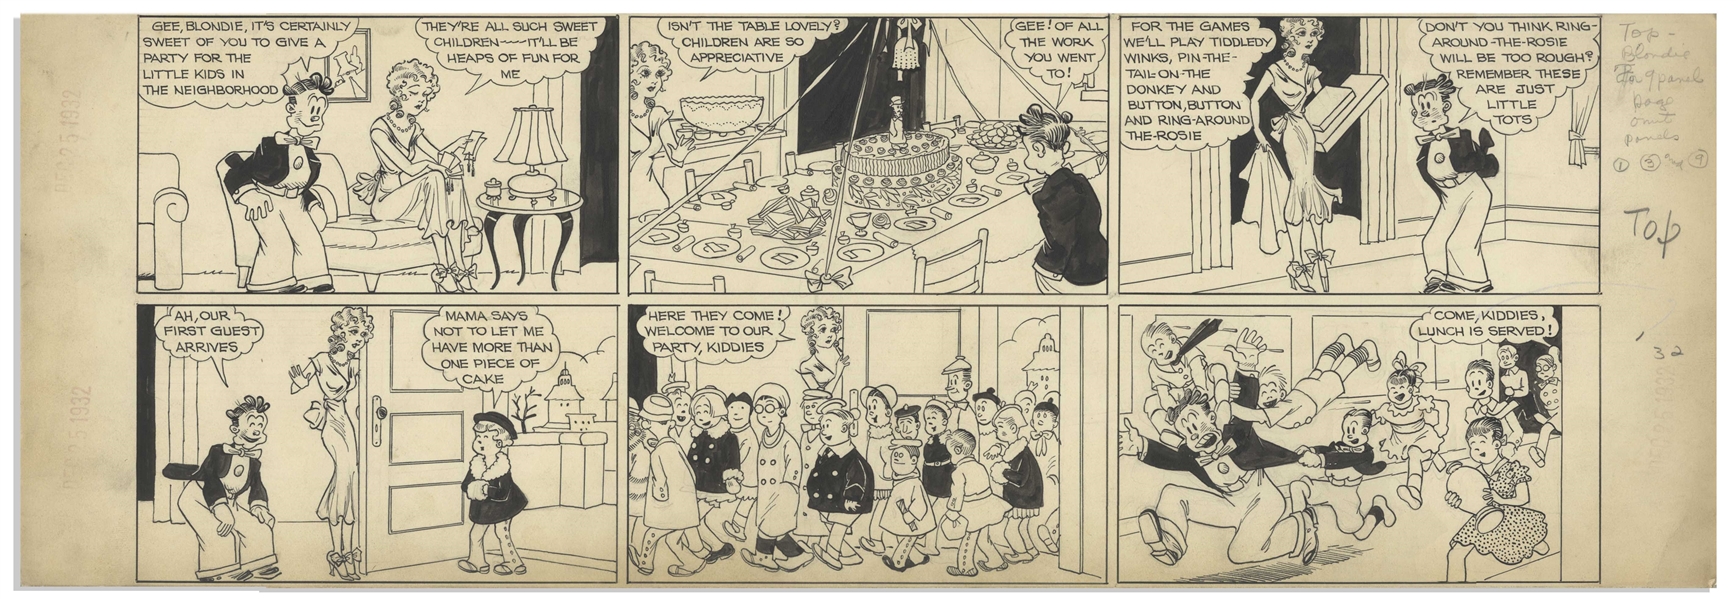 Chic Young Hand-Drawn ''Blondie'' Sunday Comic Strip From Christmas, 1932 Featuring Blondie, Her Boyfriend Hiho & a Children's Party